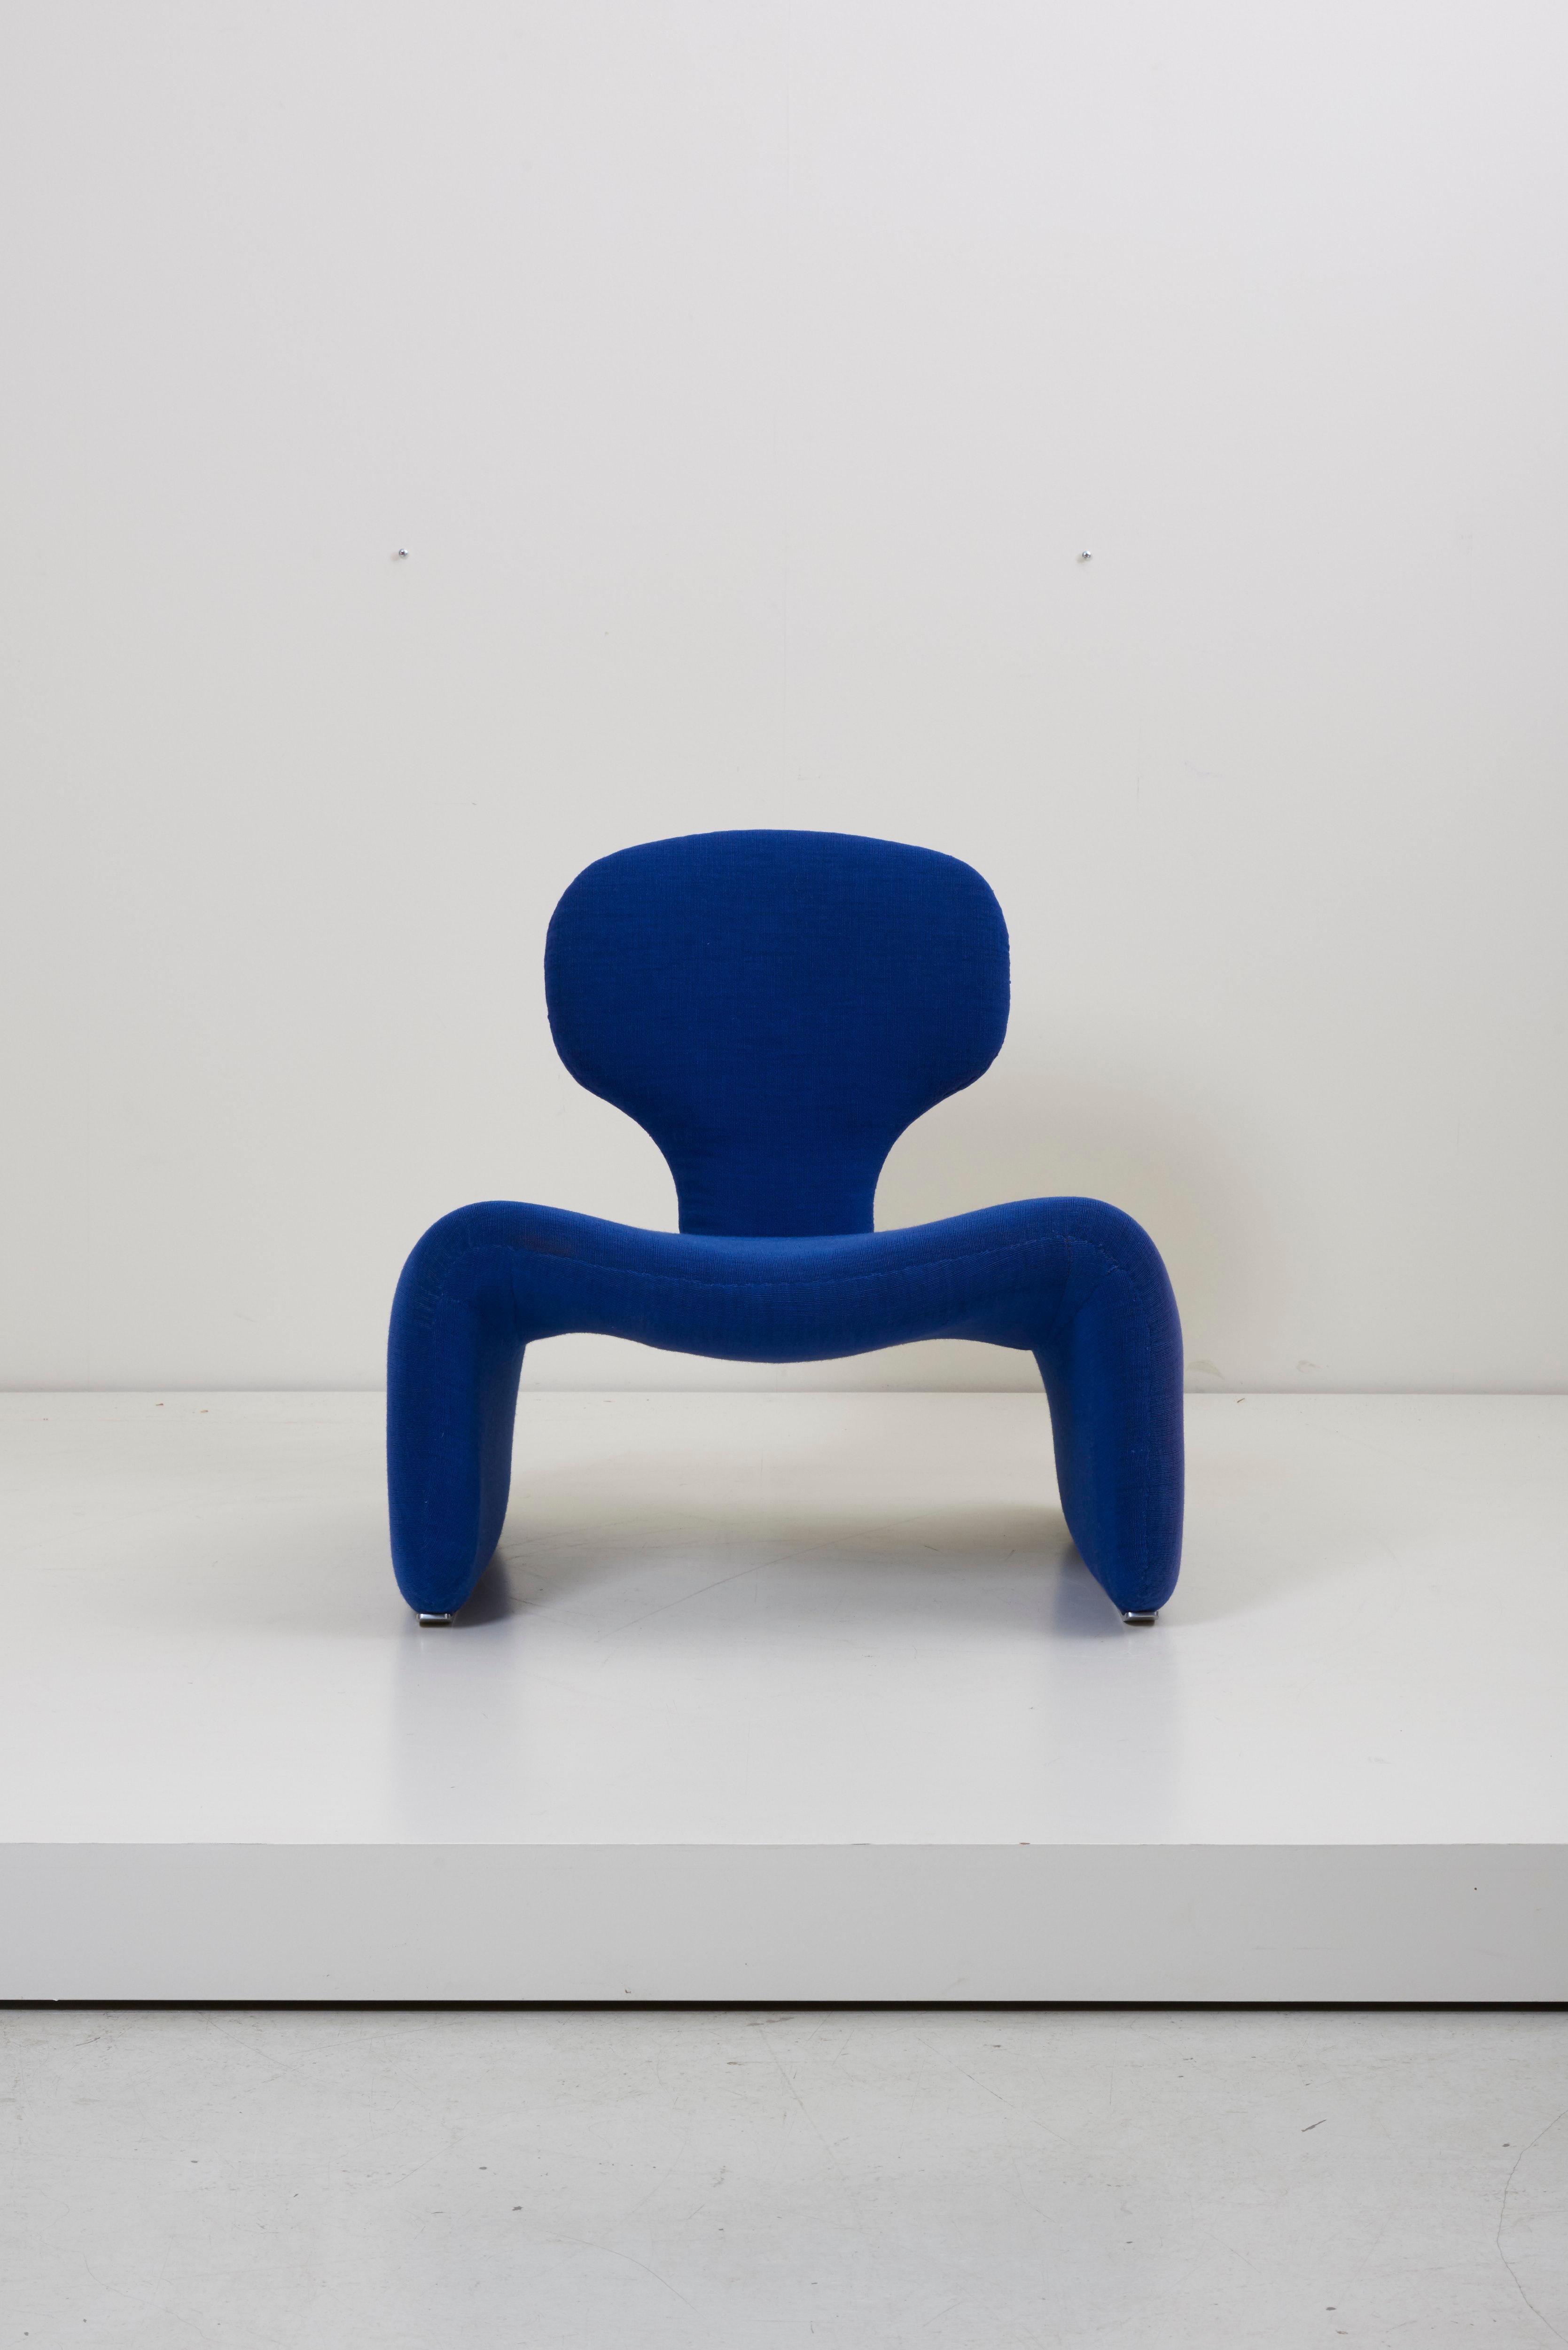 Djinn chair and ottoman by Olivier Mourgue for Airborne.
An iconic piece, as chosen by Stanley Kubric for 2001 a Space Odysee.
Upholstery needed - could be done by us, according to your wishes.

Dimensions of chair are shown on the listing, the